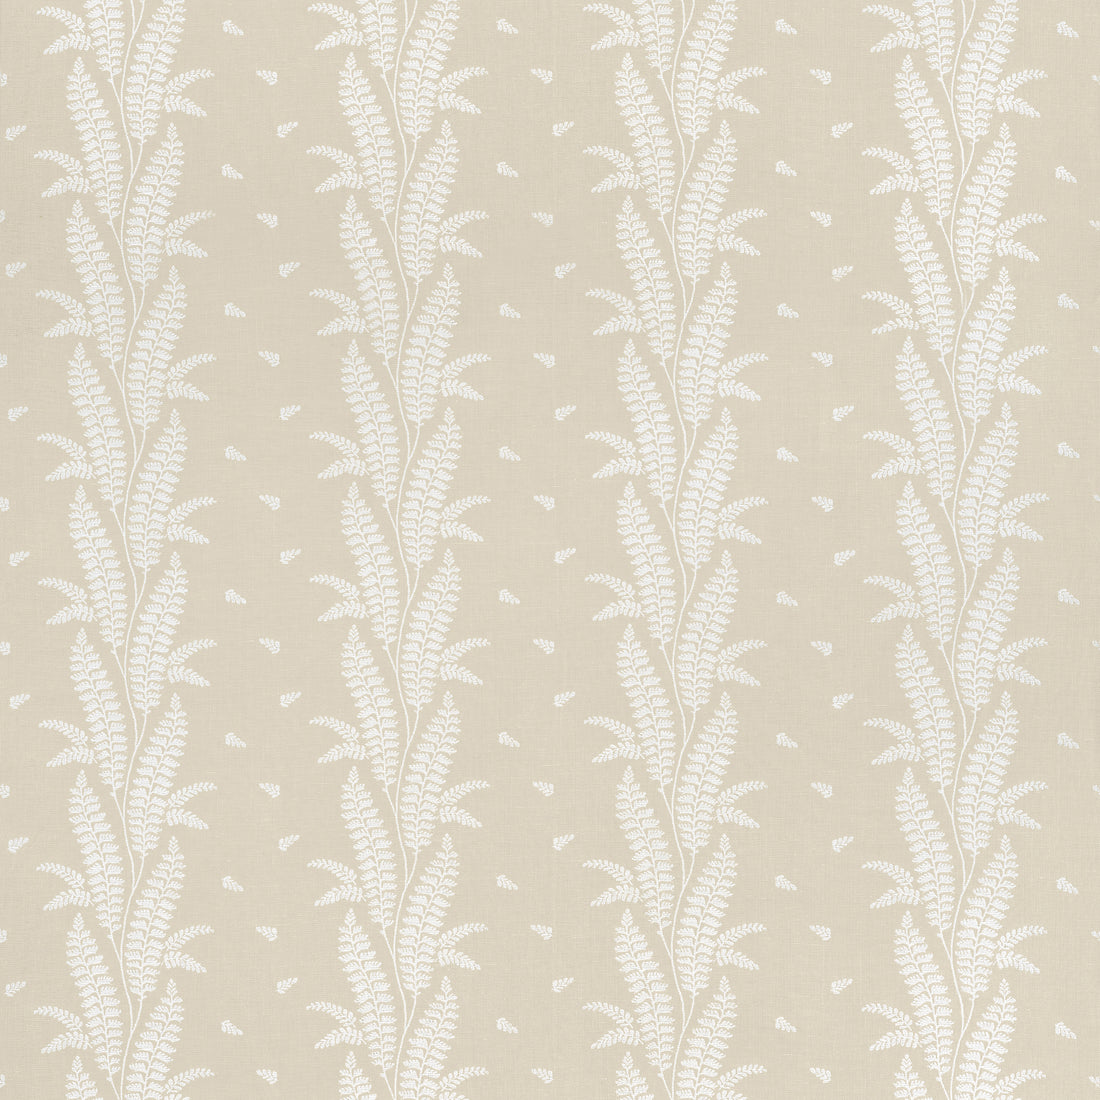 Ensbury Fern fabric in beige color - pattern number AW57824 - by Anna French in the Bristol collection